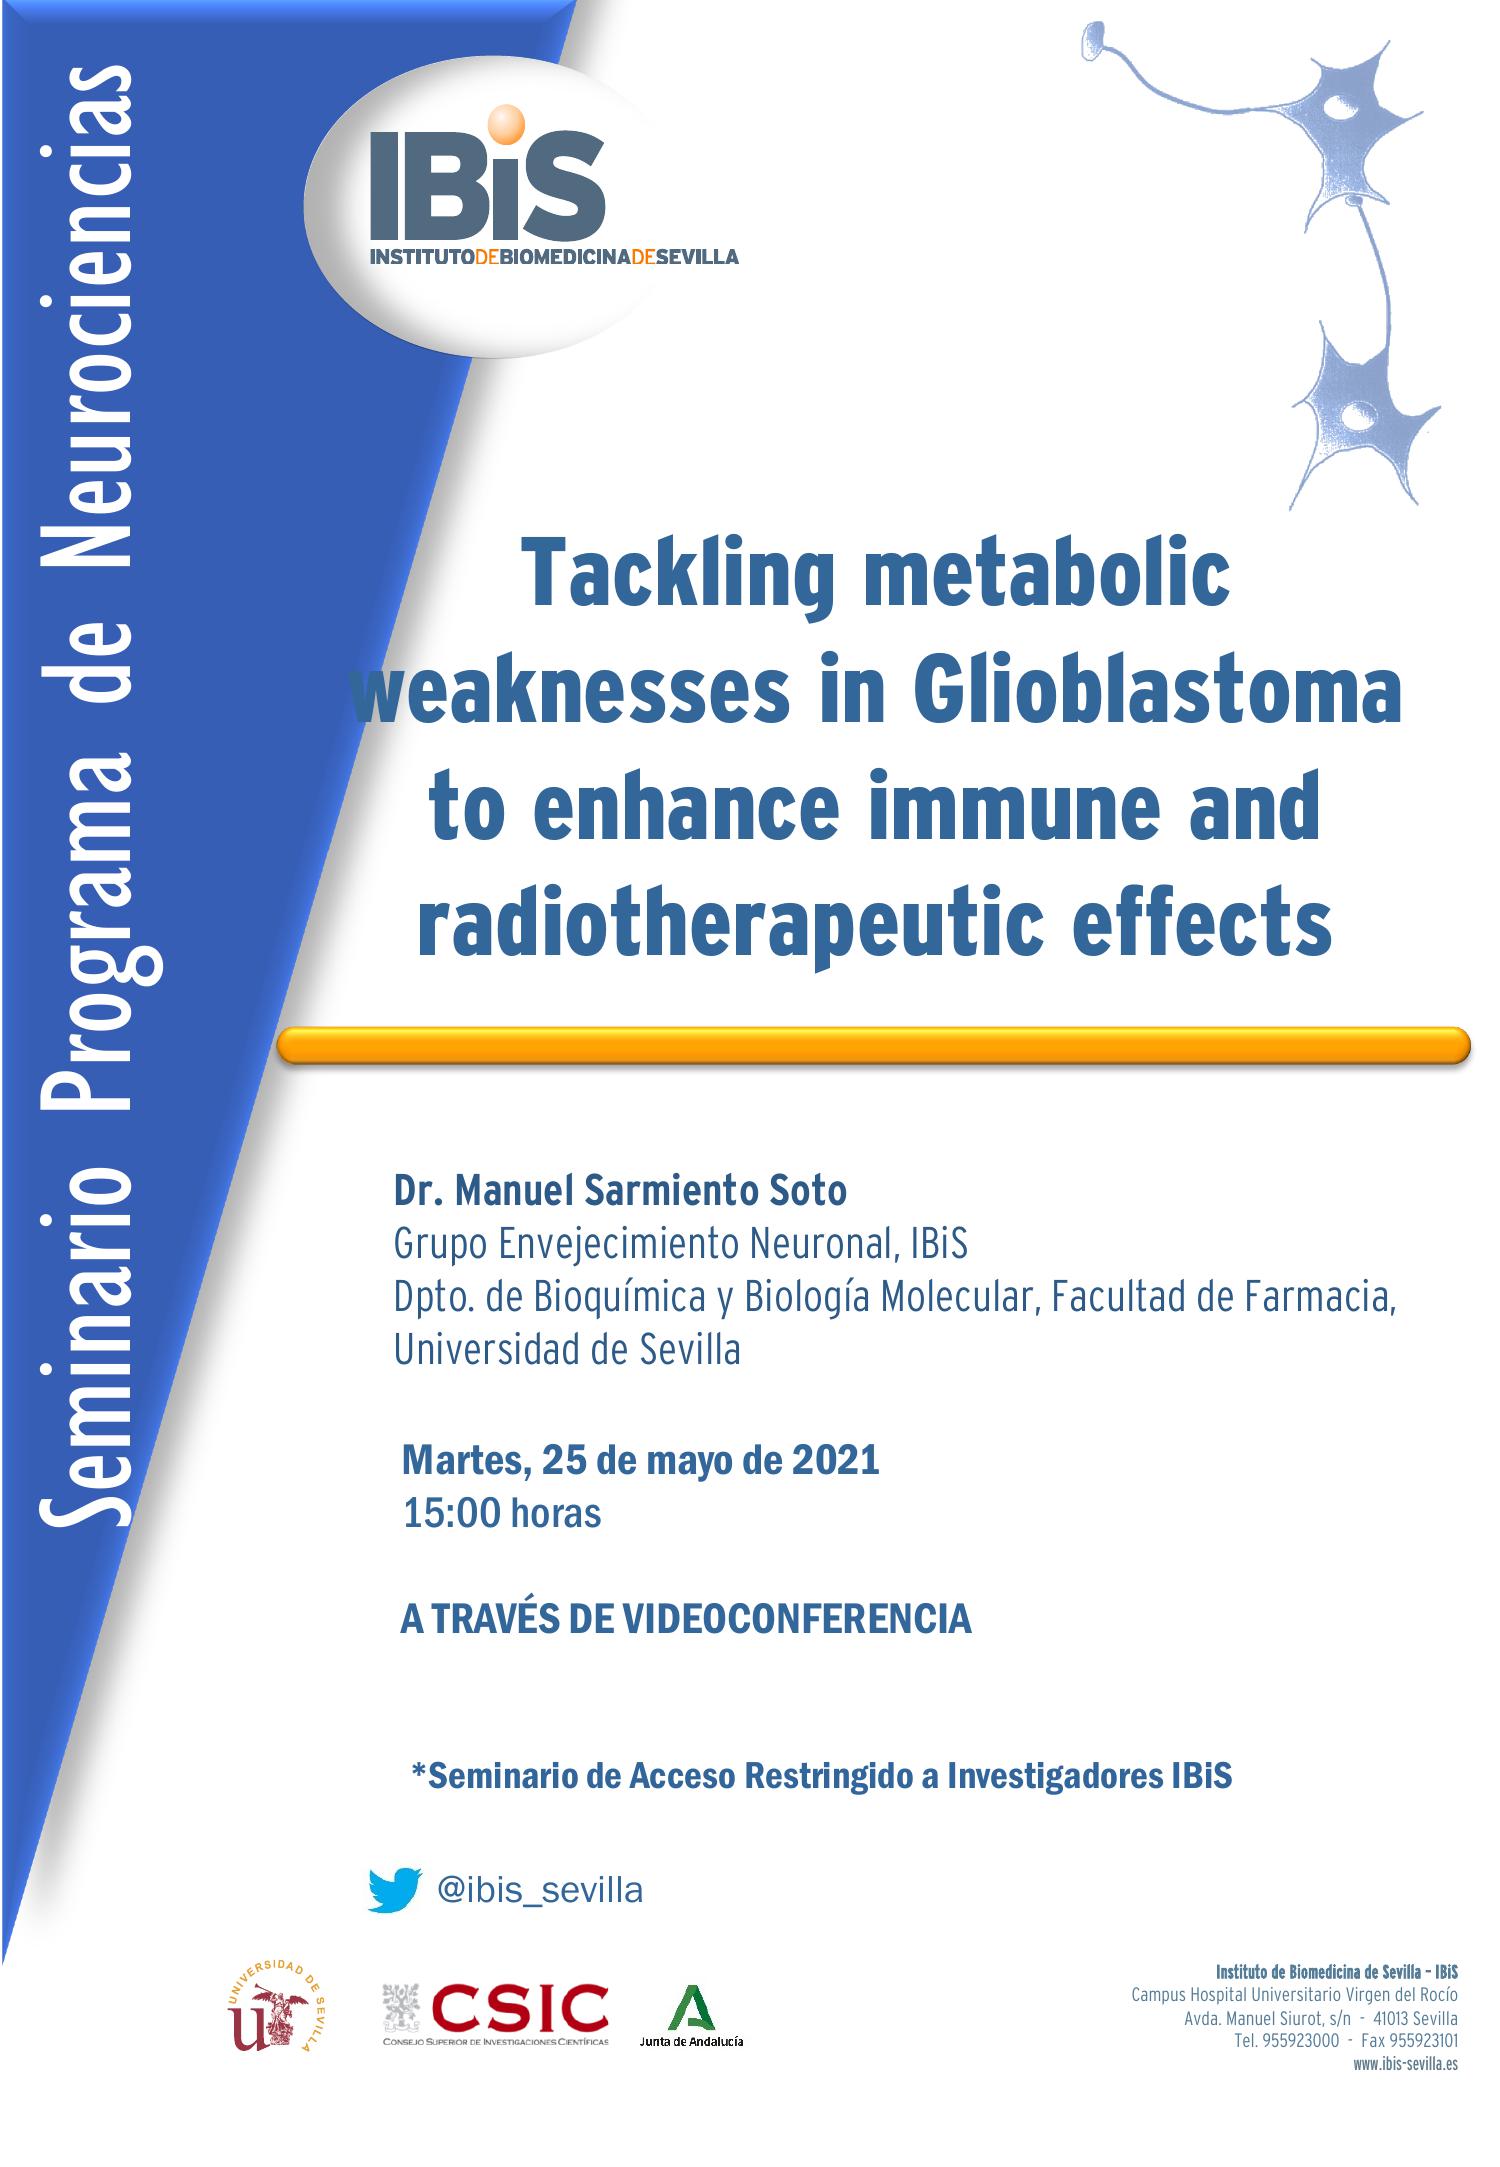 Poster: Tackling metabolic weaknesses in Glioblastoma to enhance immune and radiotherapeutic effects